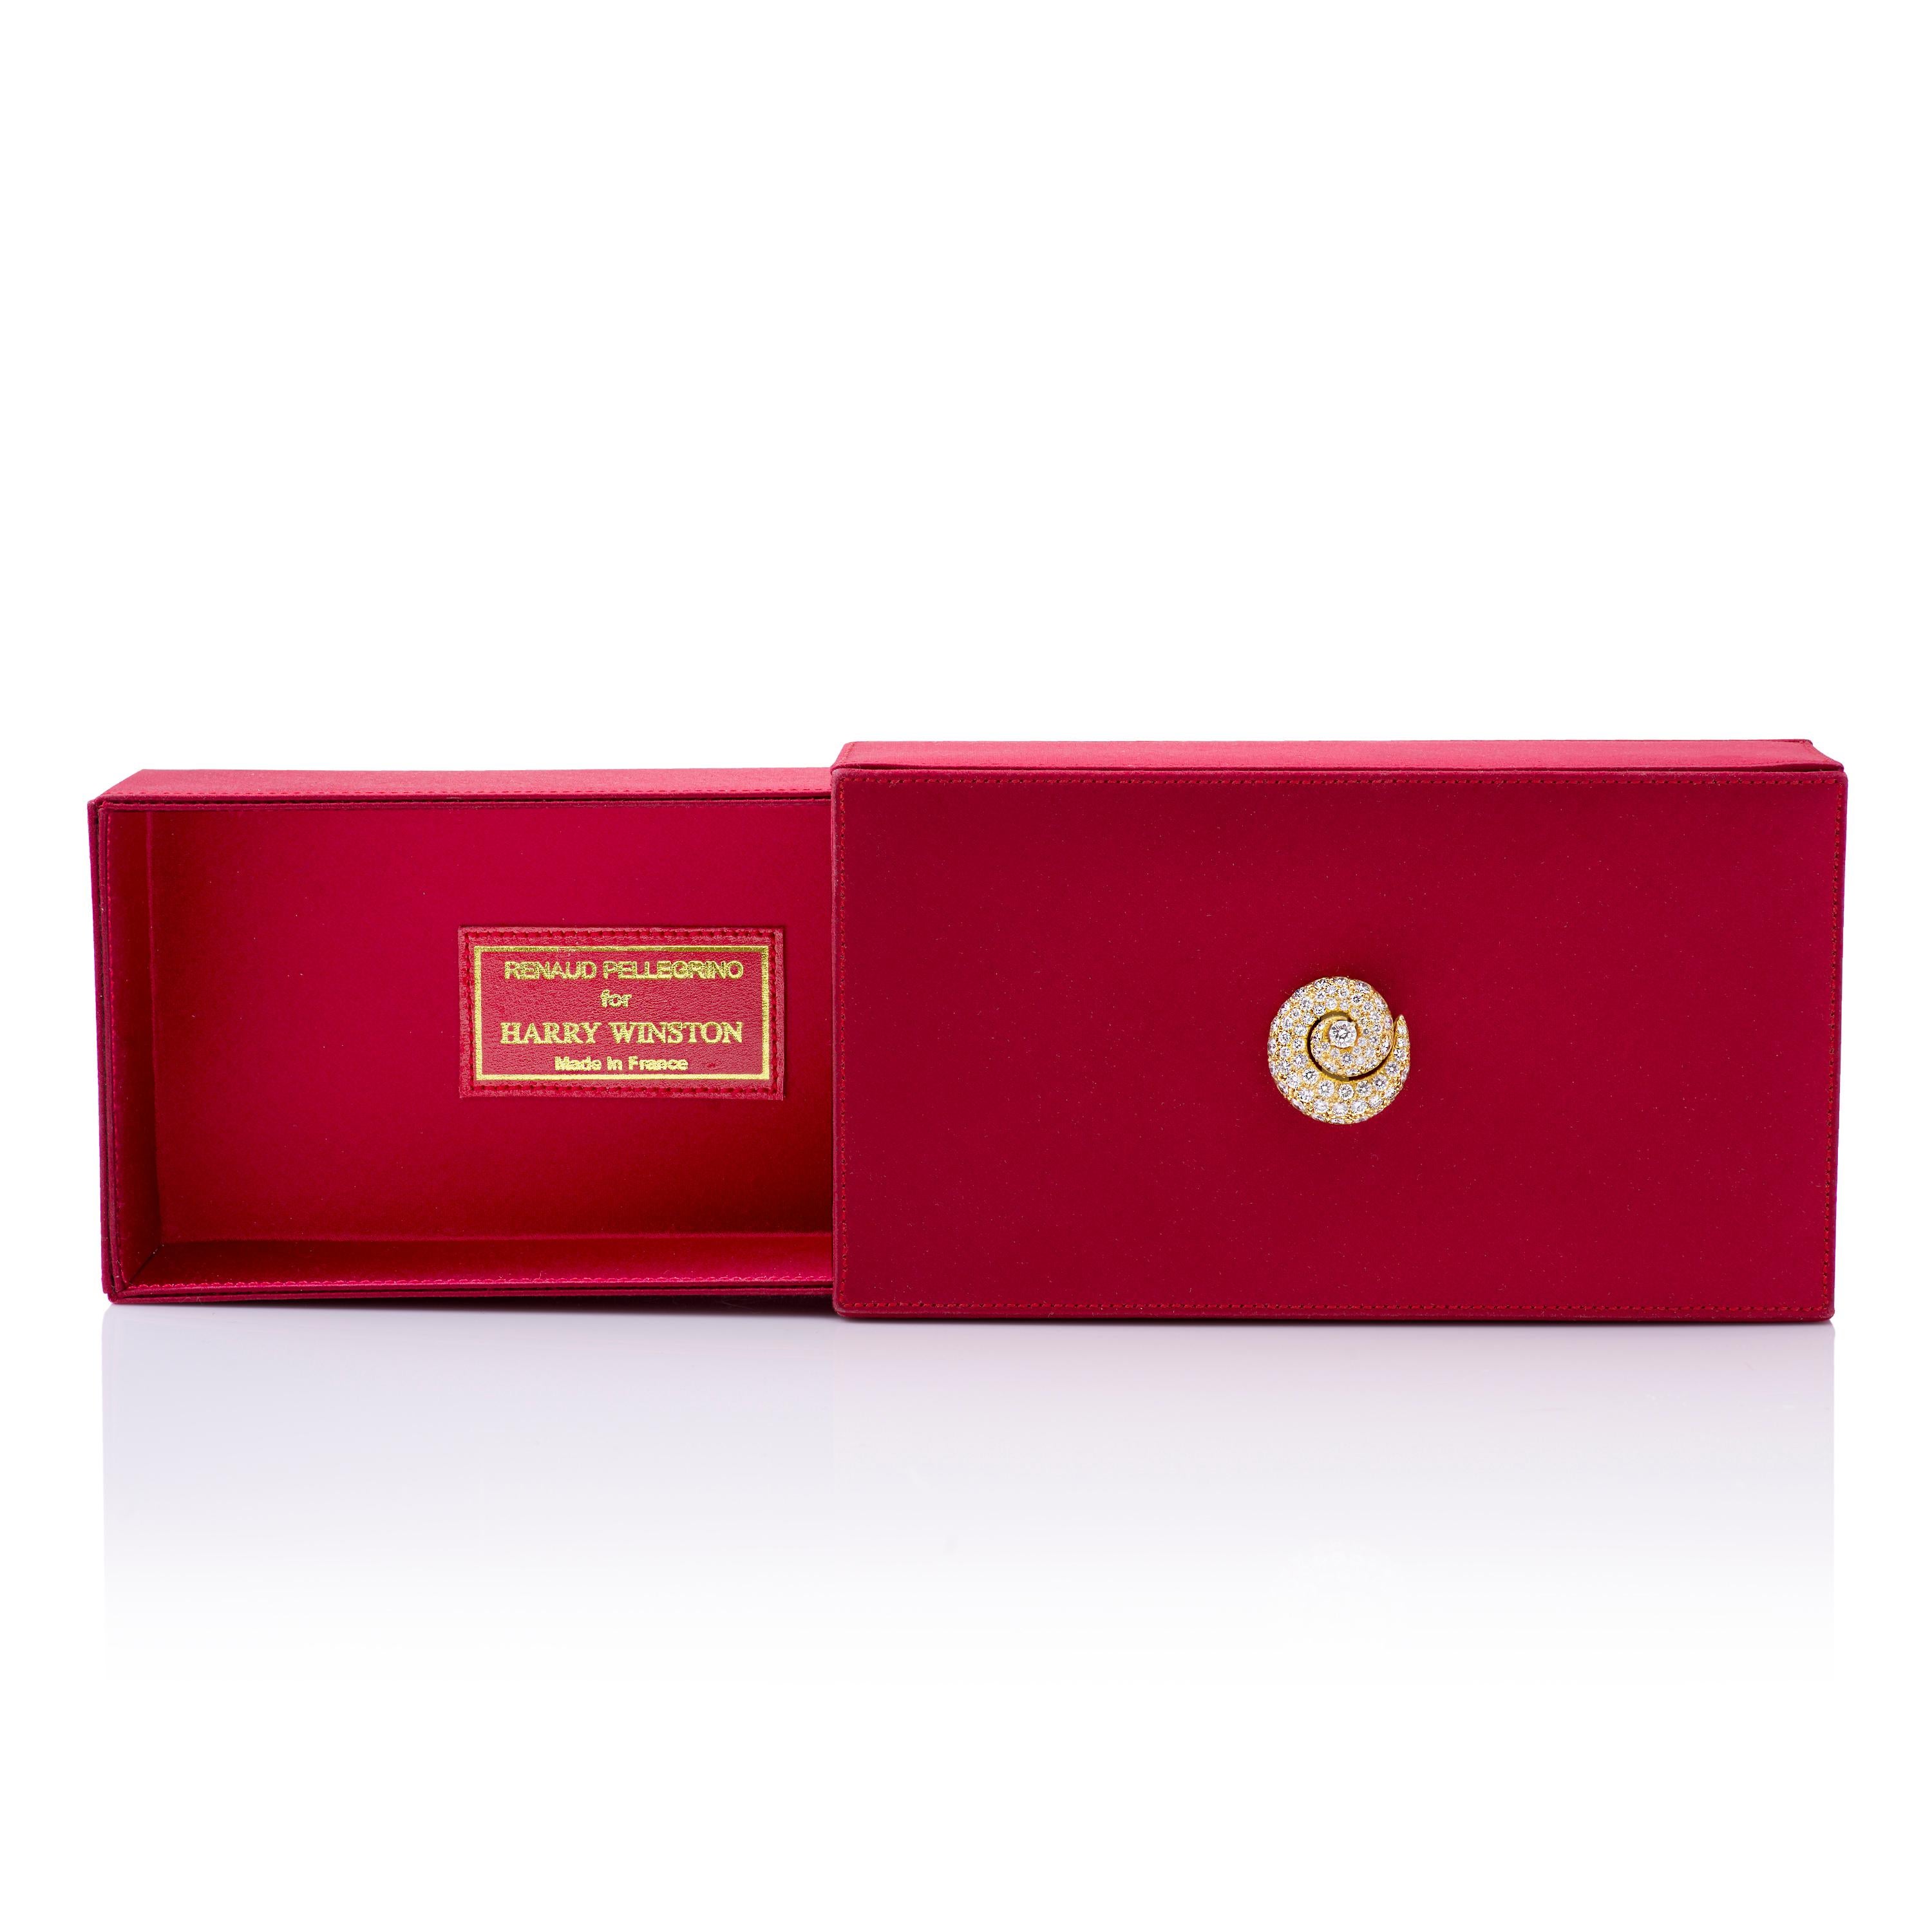 Vintage Renaud Pelligrino for Harry Winston red satin evening box w/ 18k yellow gold and diamond accent, which can be used as a clutch or jewelry box.  

This clutch features an ornate 18k yellow gold swirl set with approximately 4.97 carat of round